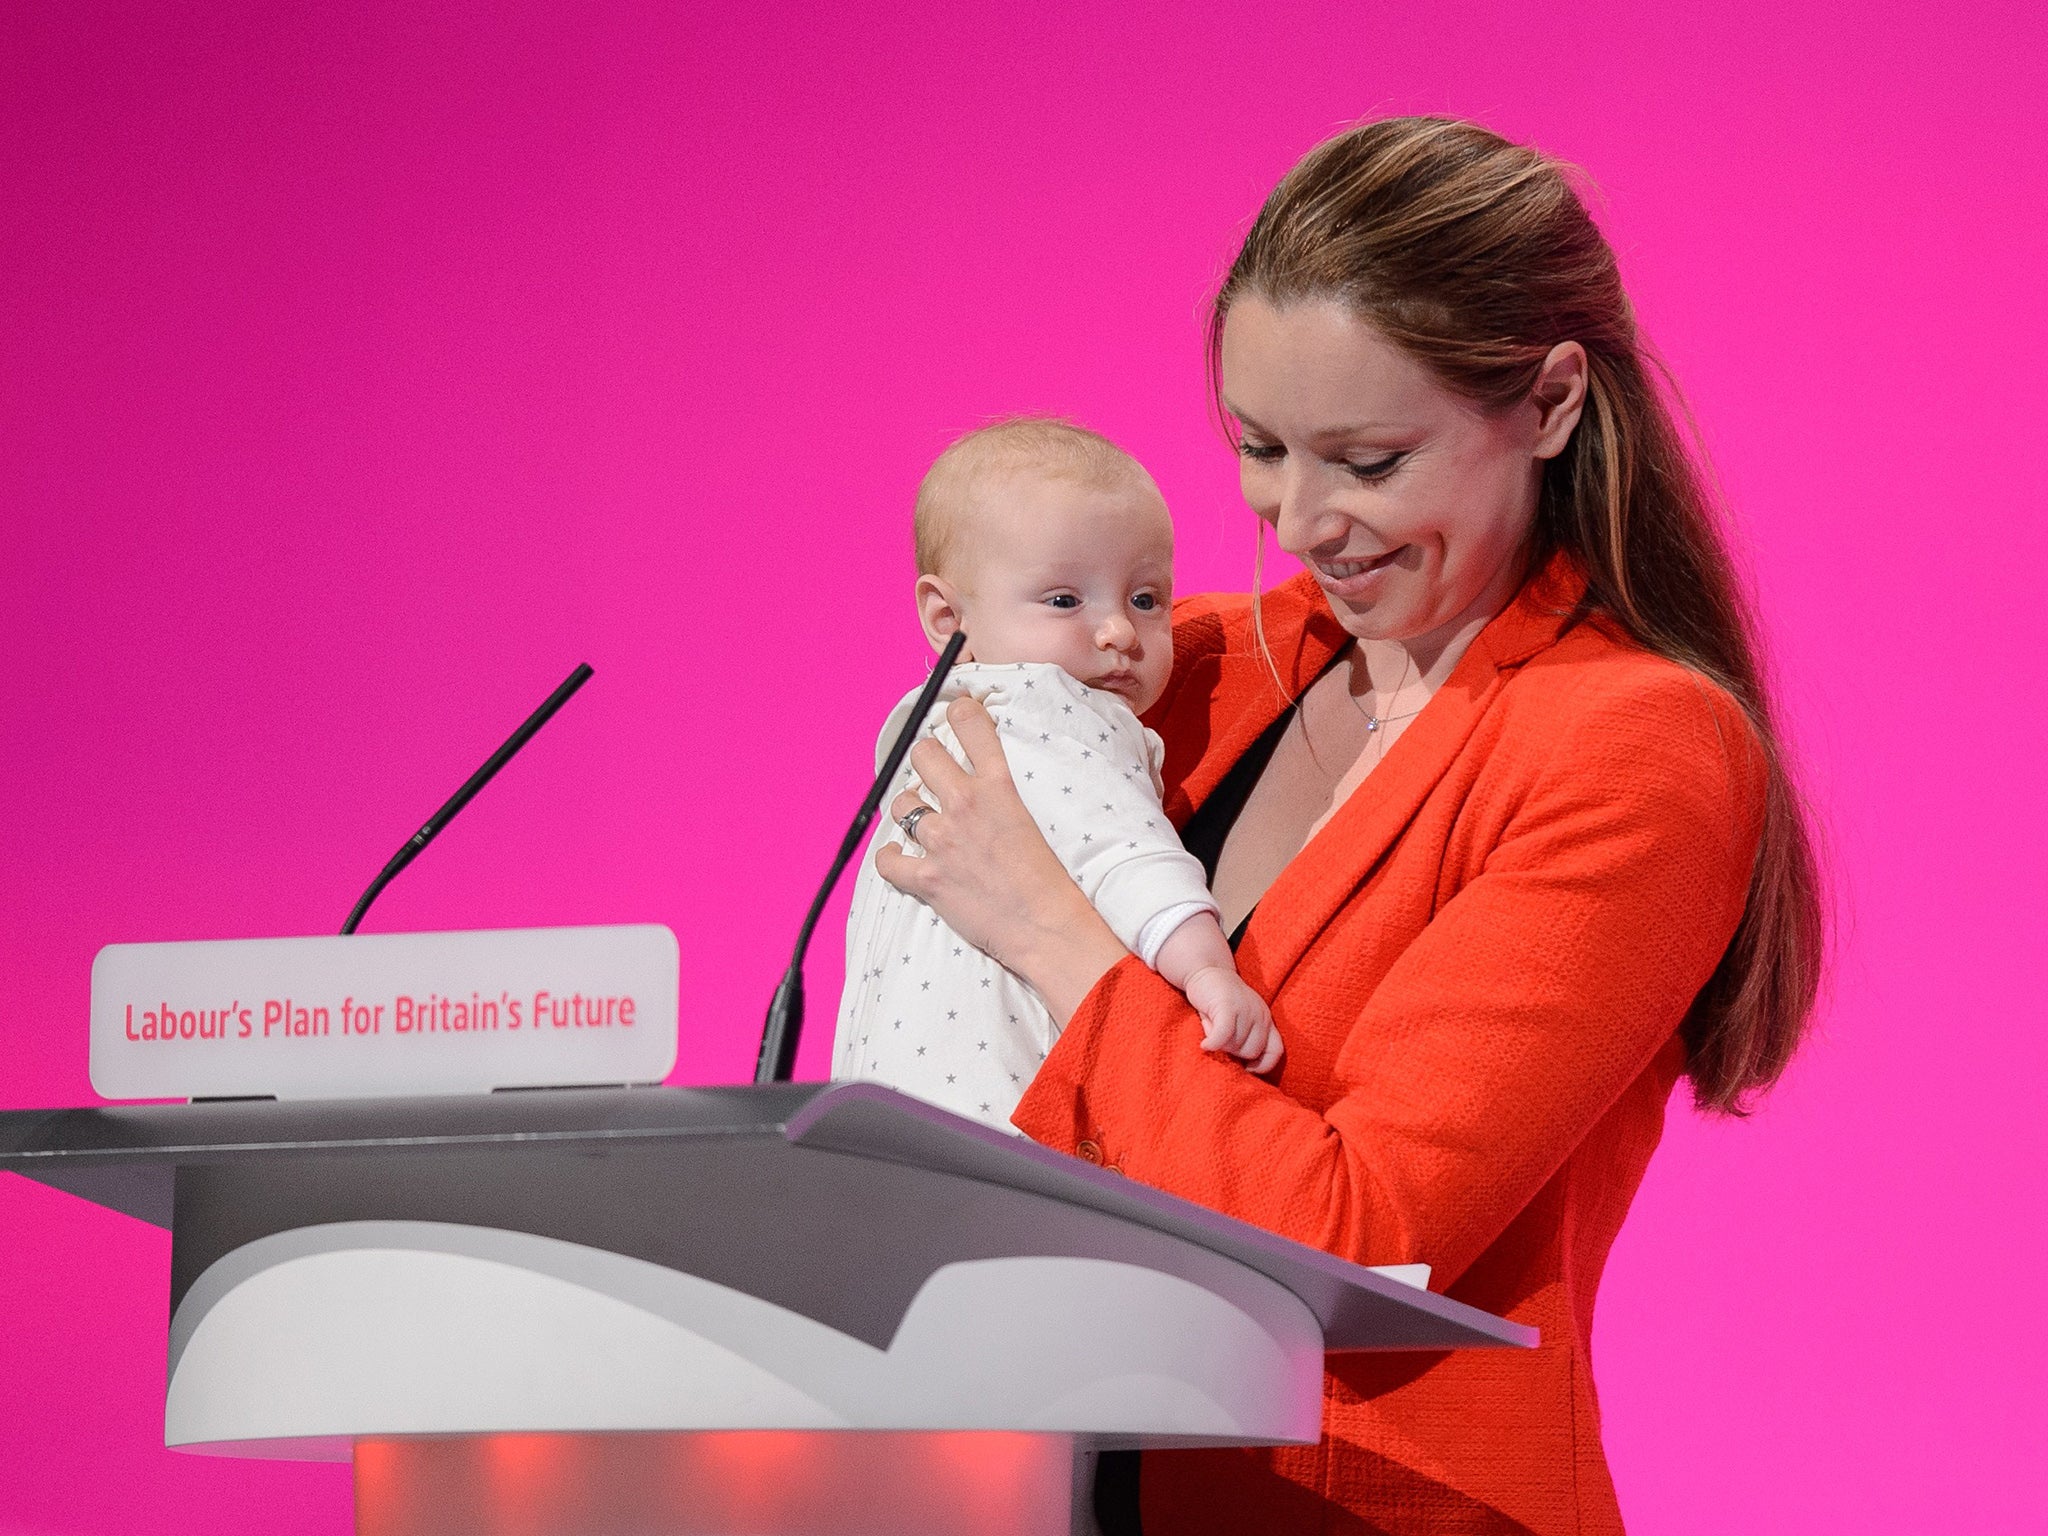 Catherine Atkinson, pictured with her then 3-month-old son in 2014, was confronted by a Tory councillor over her suitability to be an MP while pregnant with her second child